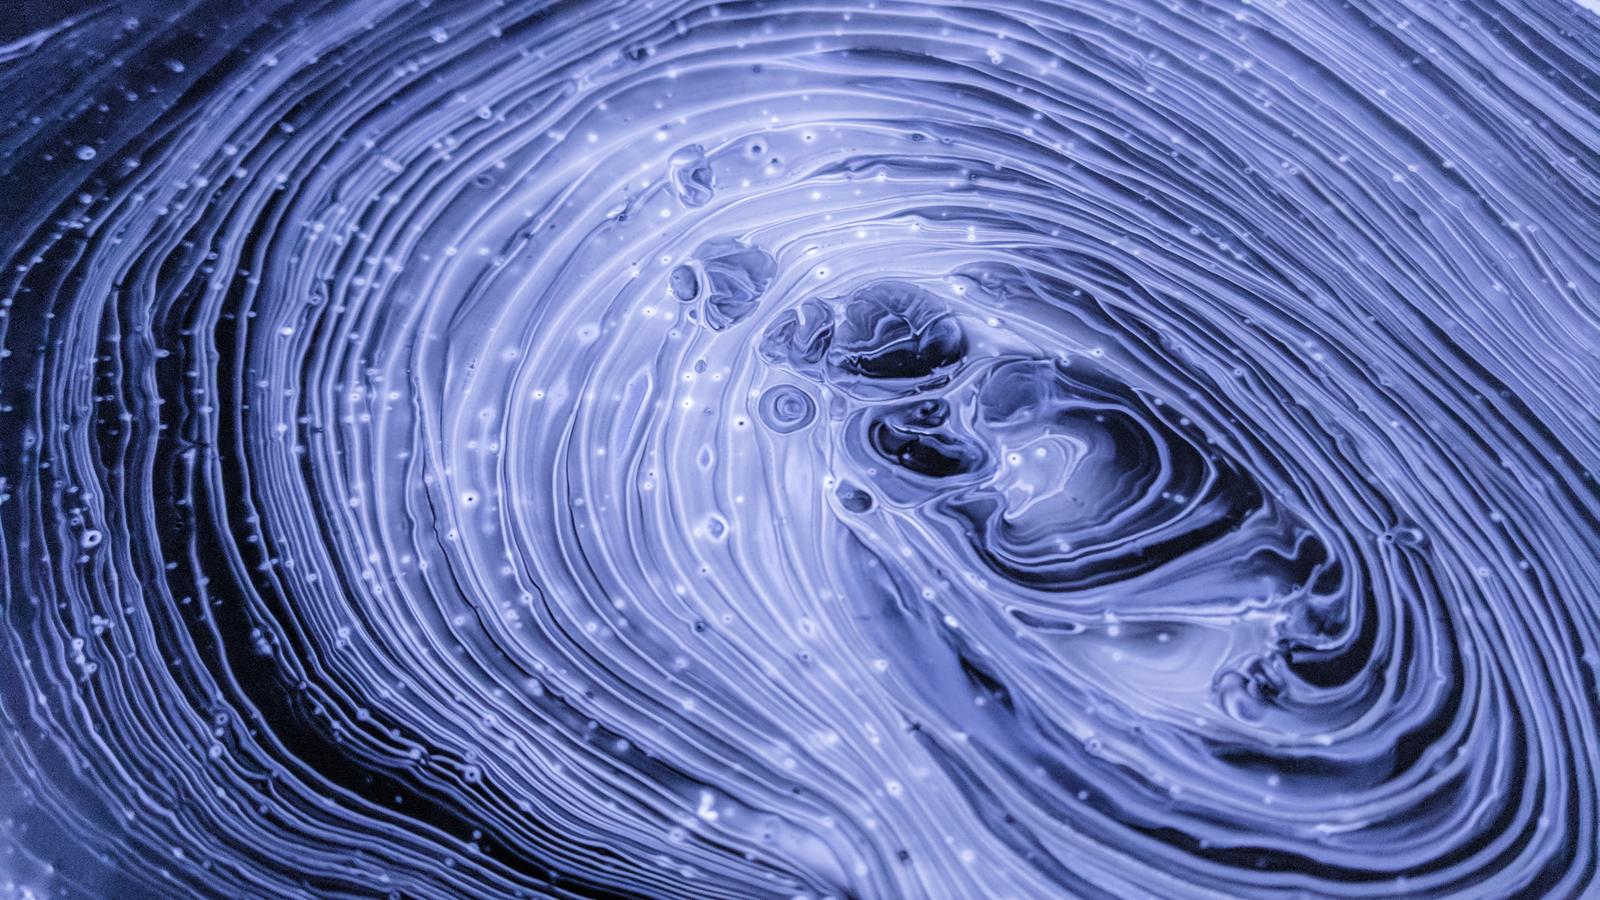 Abstract blue and white swirl